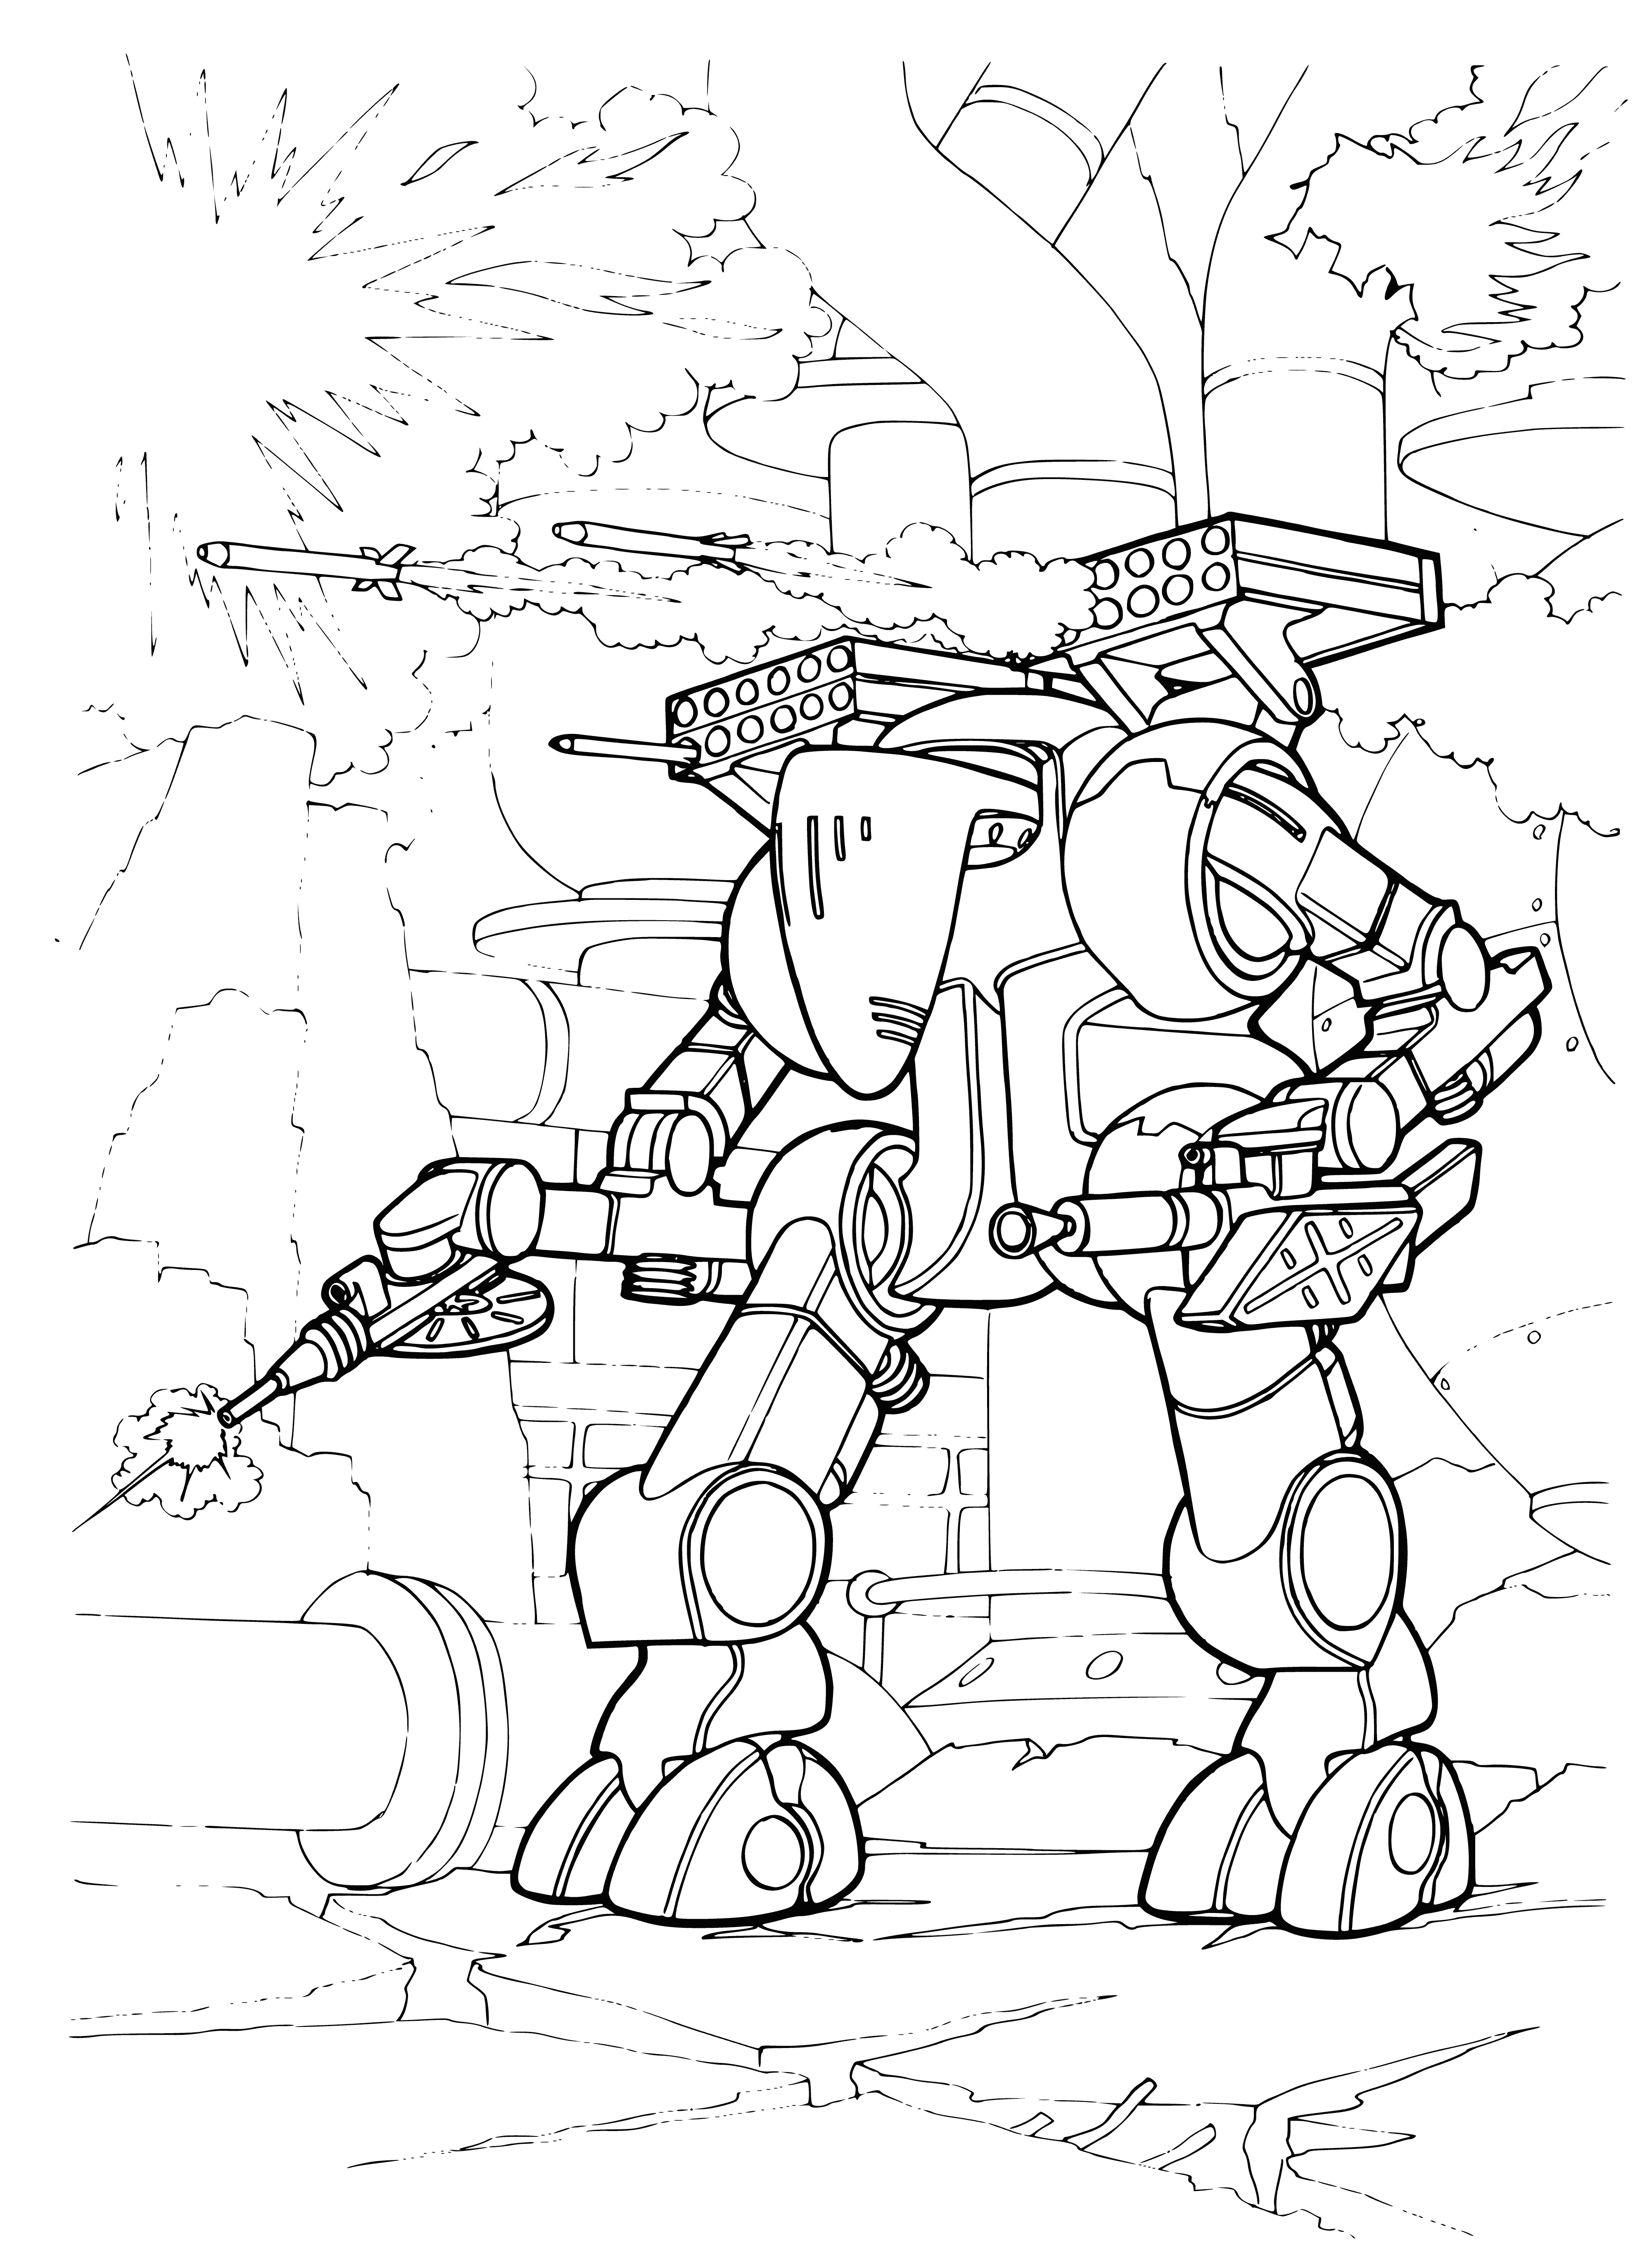 coloring page: #140characters: Future wars are a new, gritty reality; soldiers don armored suits & wield long-range firearms, while staying vigilant in cities to survive & make it to the end.